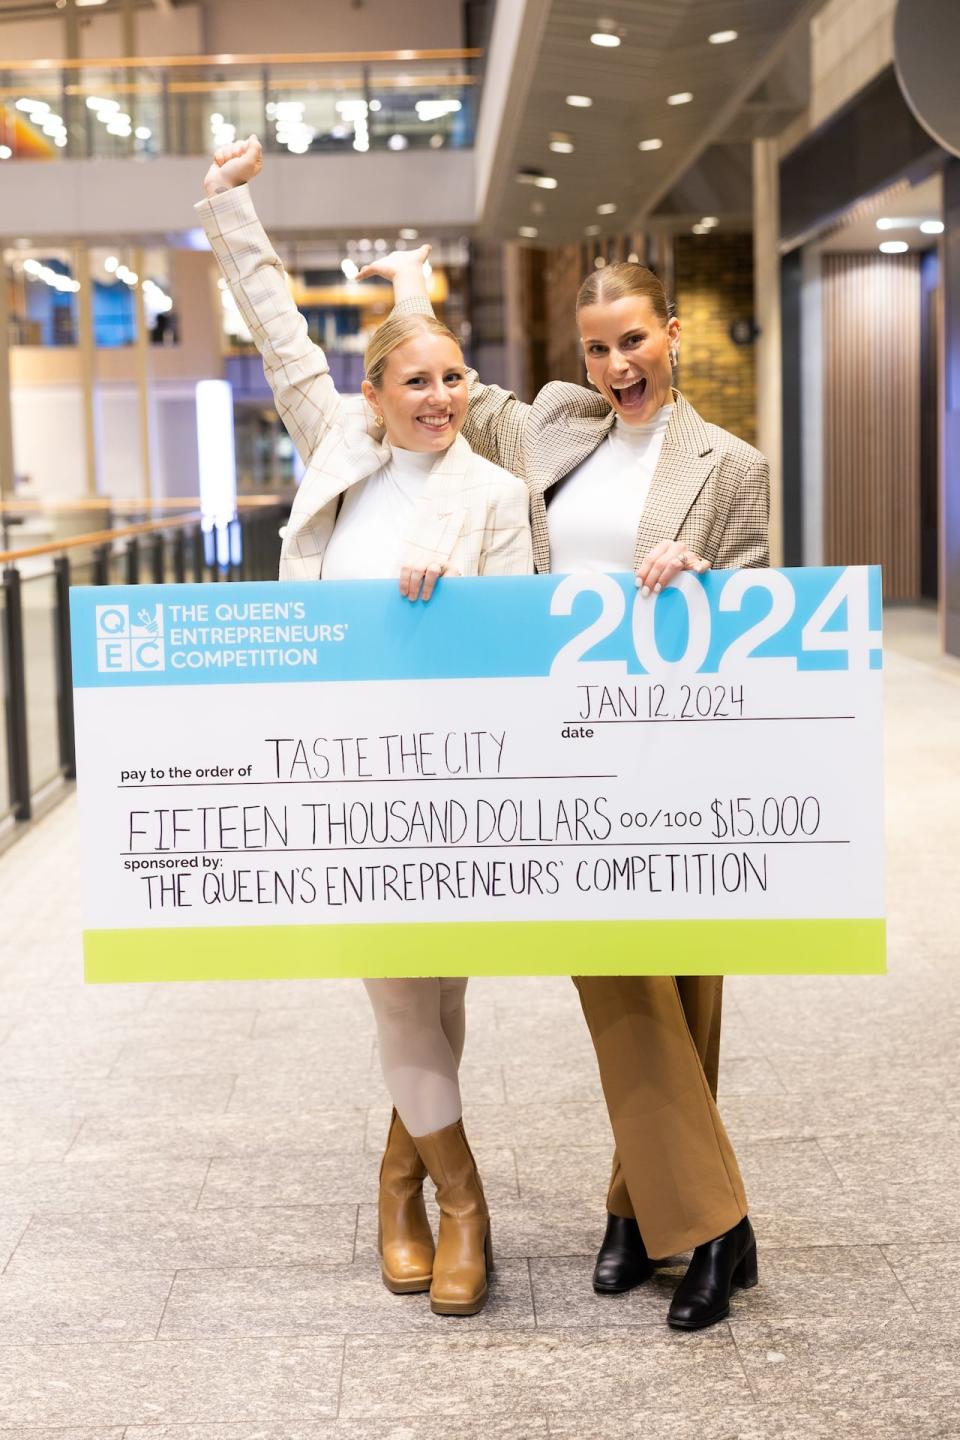 Taste the City bagged the top prize ($15,000) at the Queen’s Entrepreneurs’ Competition (QEC) earlier this month in Toronto, beating scores of other startups from different fields ranging from health to education.